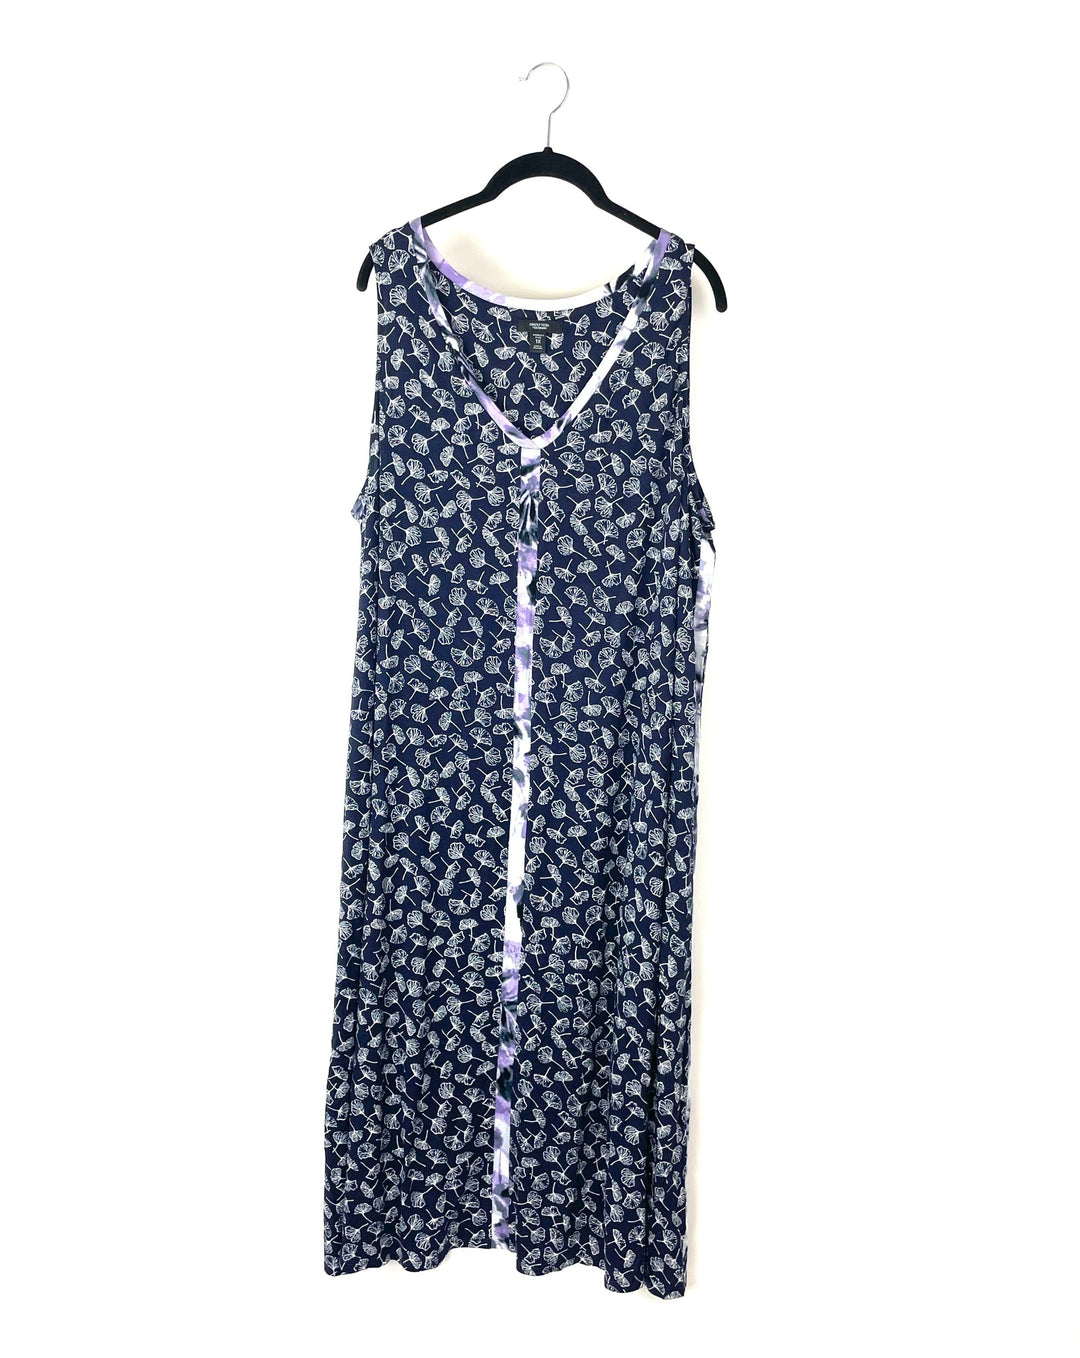 Blue And Purple Floral Lounge Dress - 1X